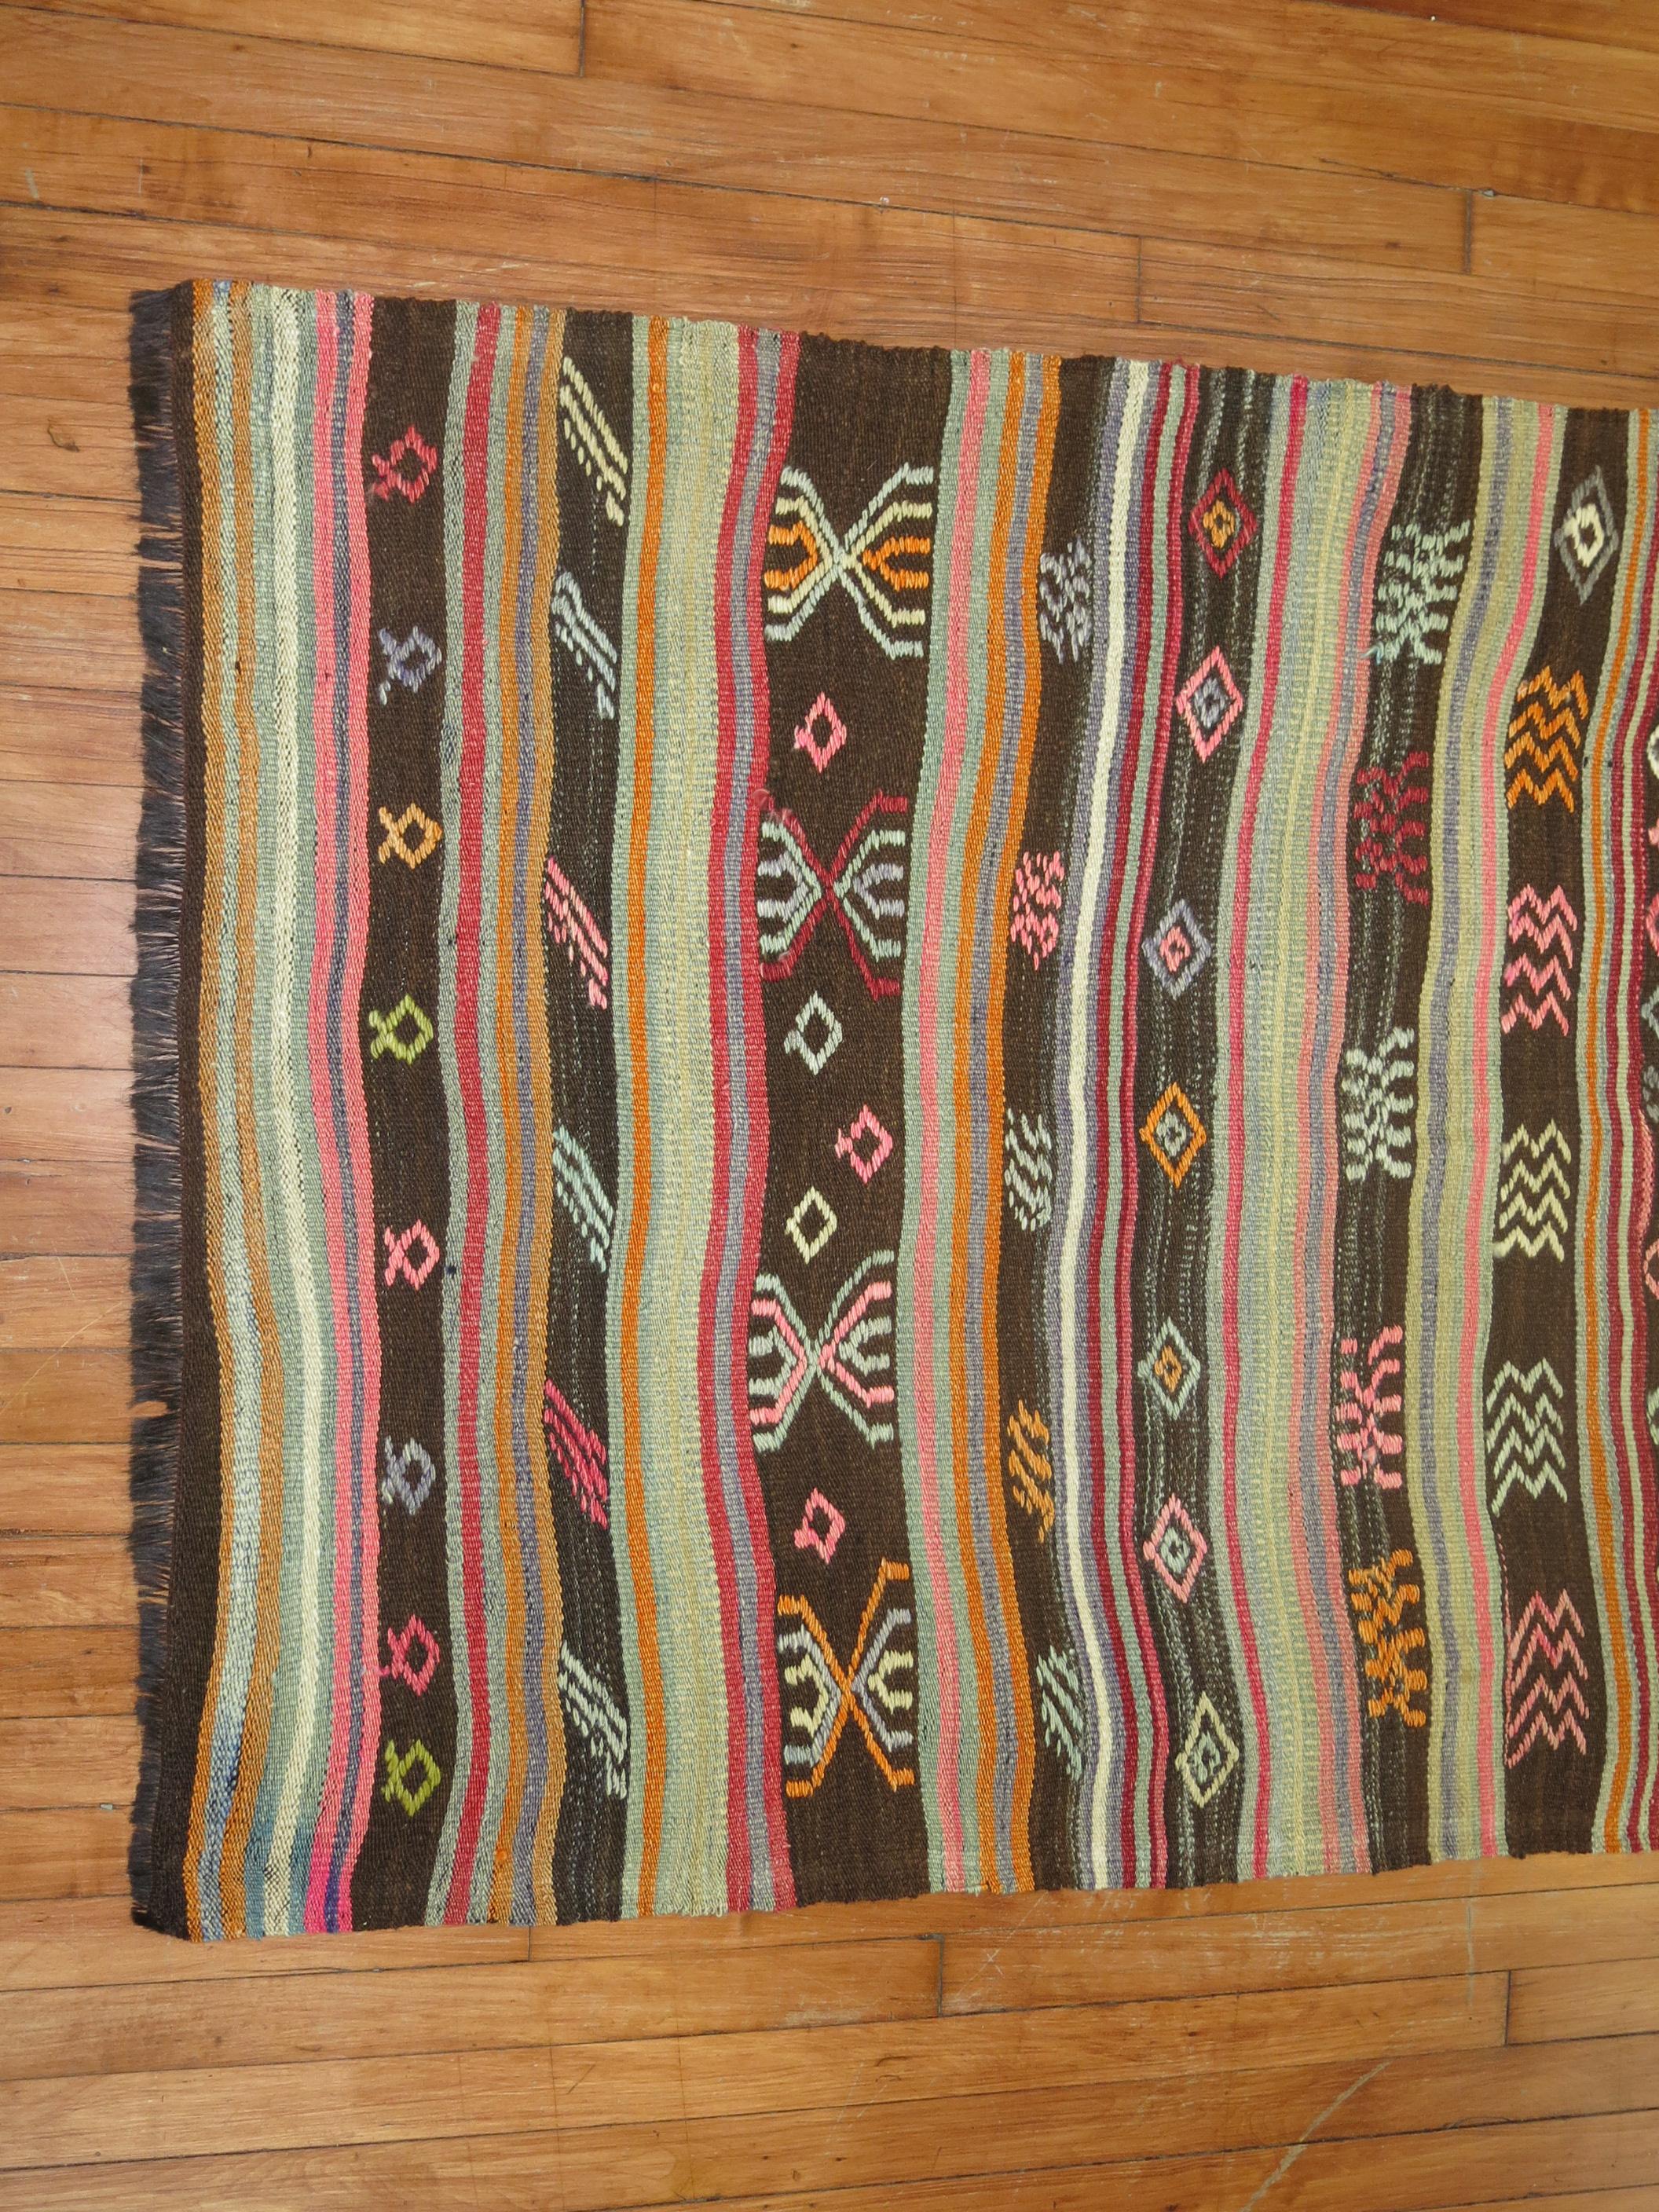 A one of a kind mid-20th century Turkish Kilim runner.

3'6'' x 9'5''